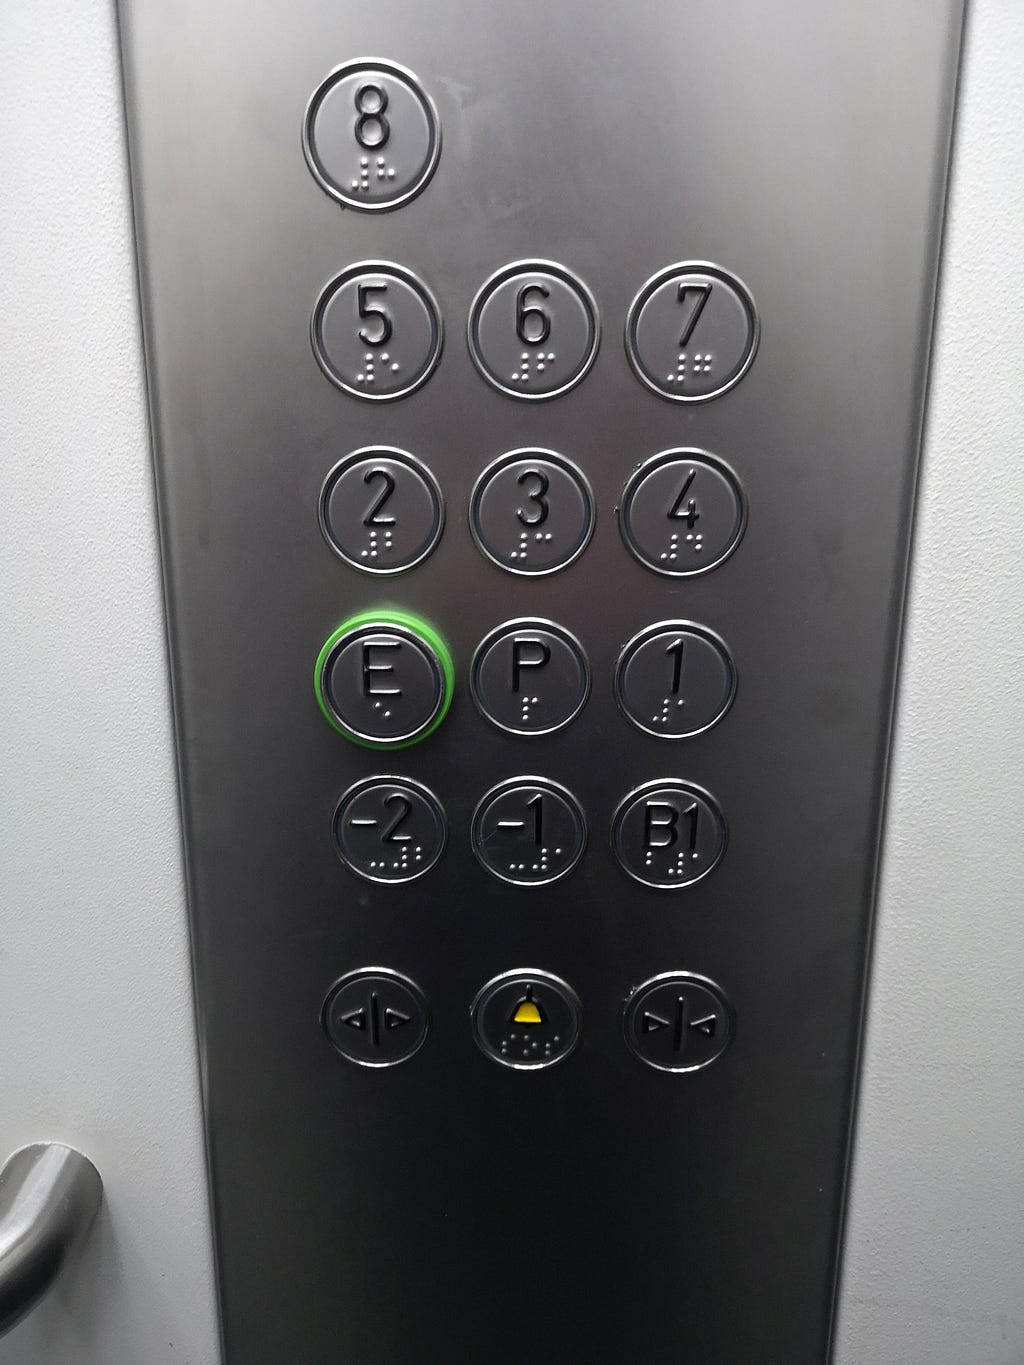 The hotel’s other elevator with buttons in another way. It has an E button to represent the entrance floor and a P button.